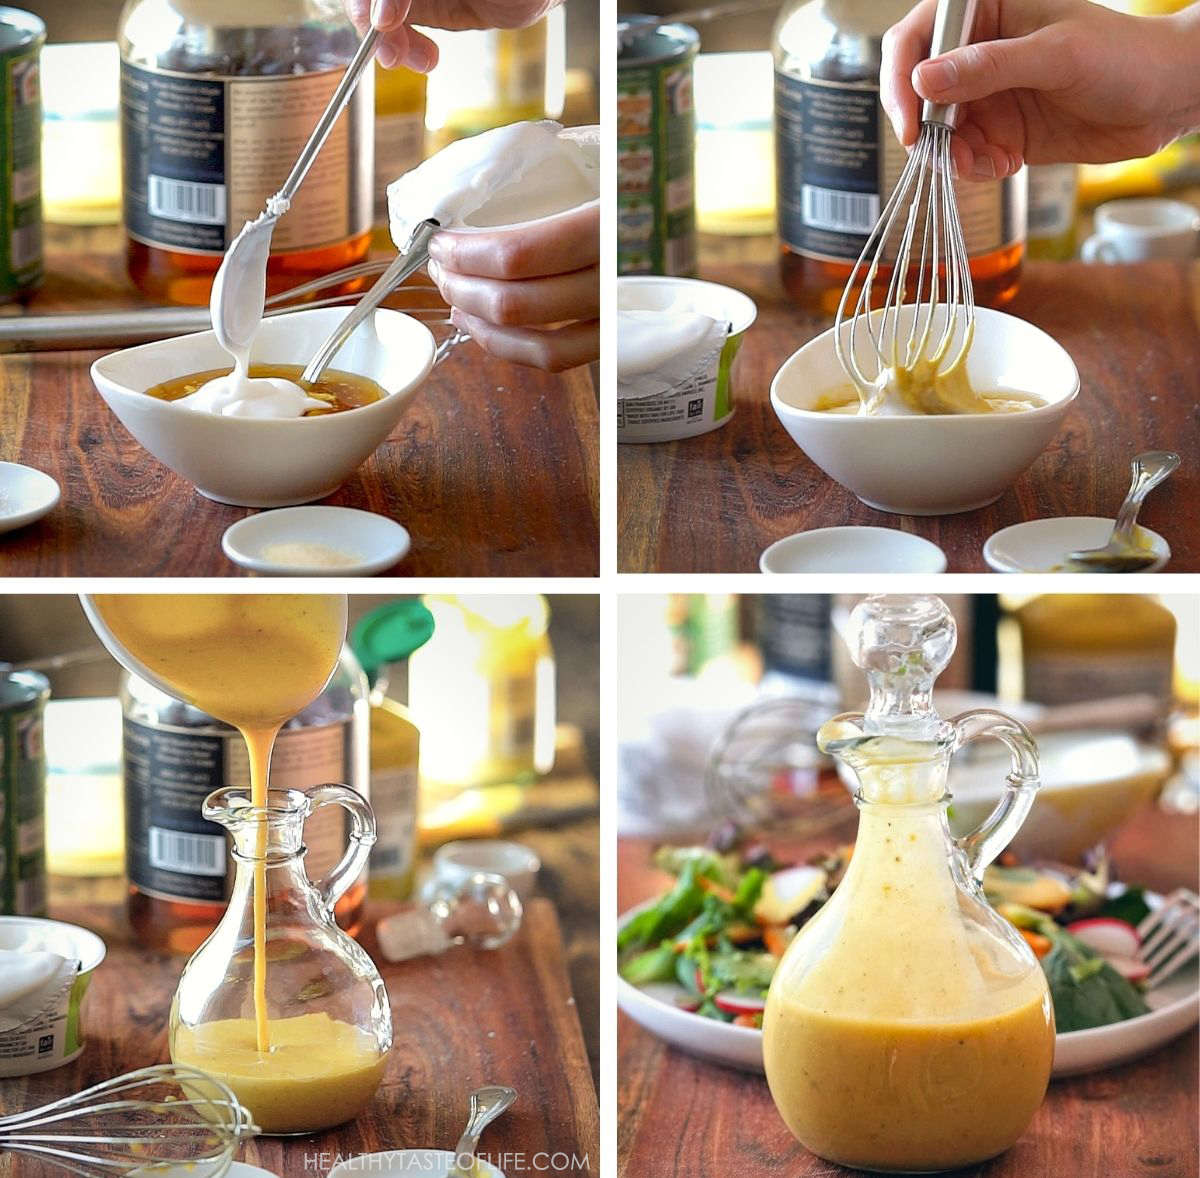 Process shots showing steps on how to make a vegan honey mustard sauce without honey.